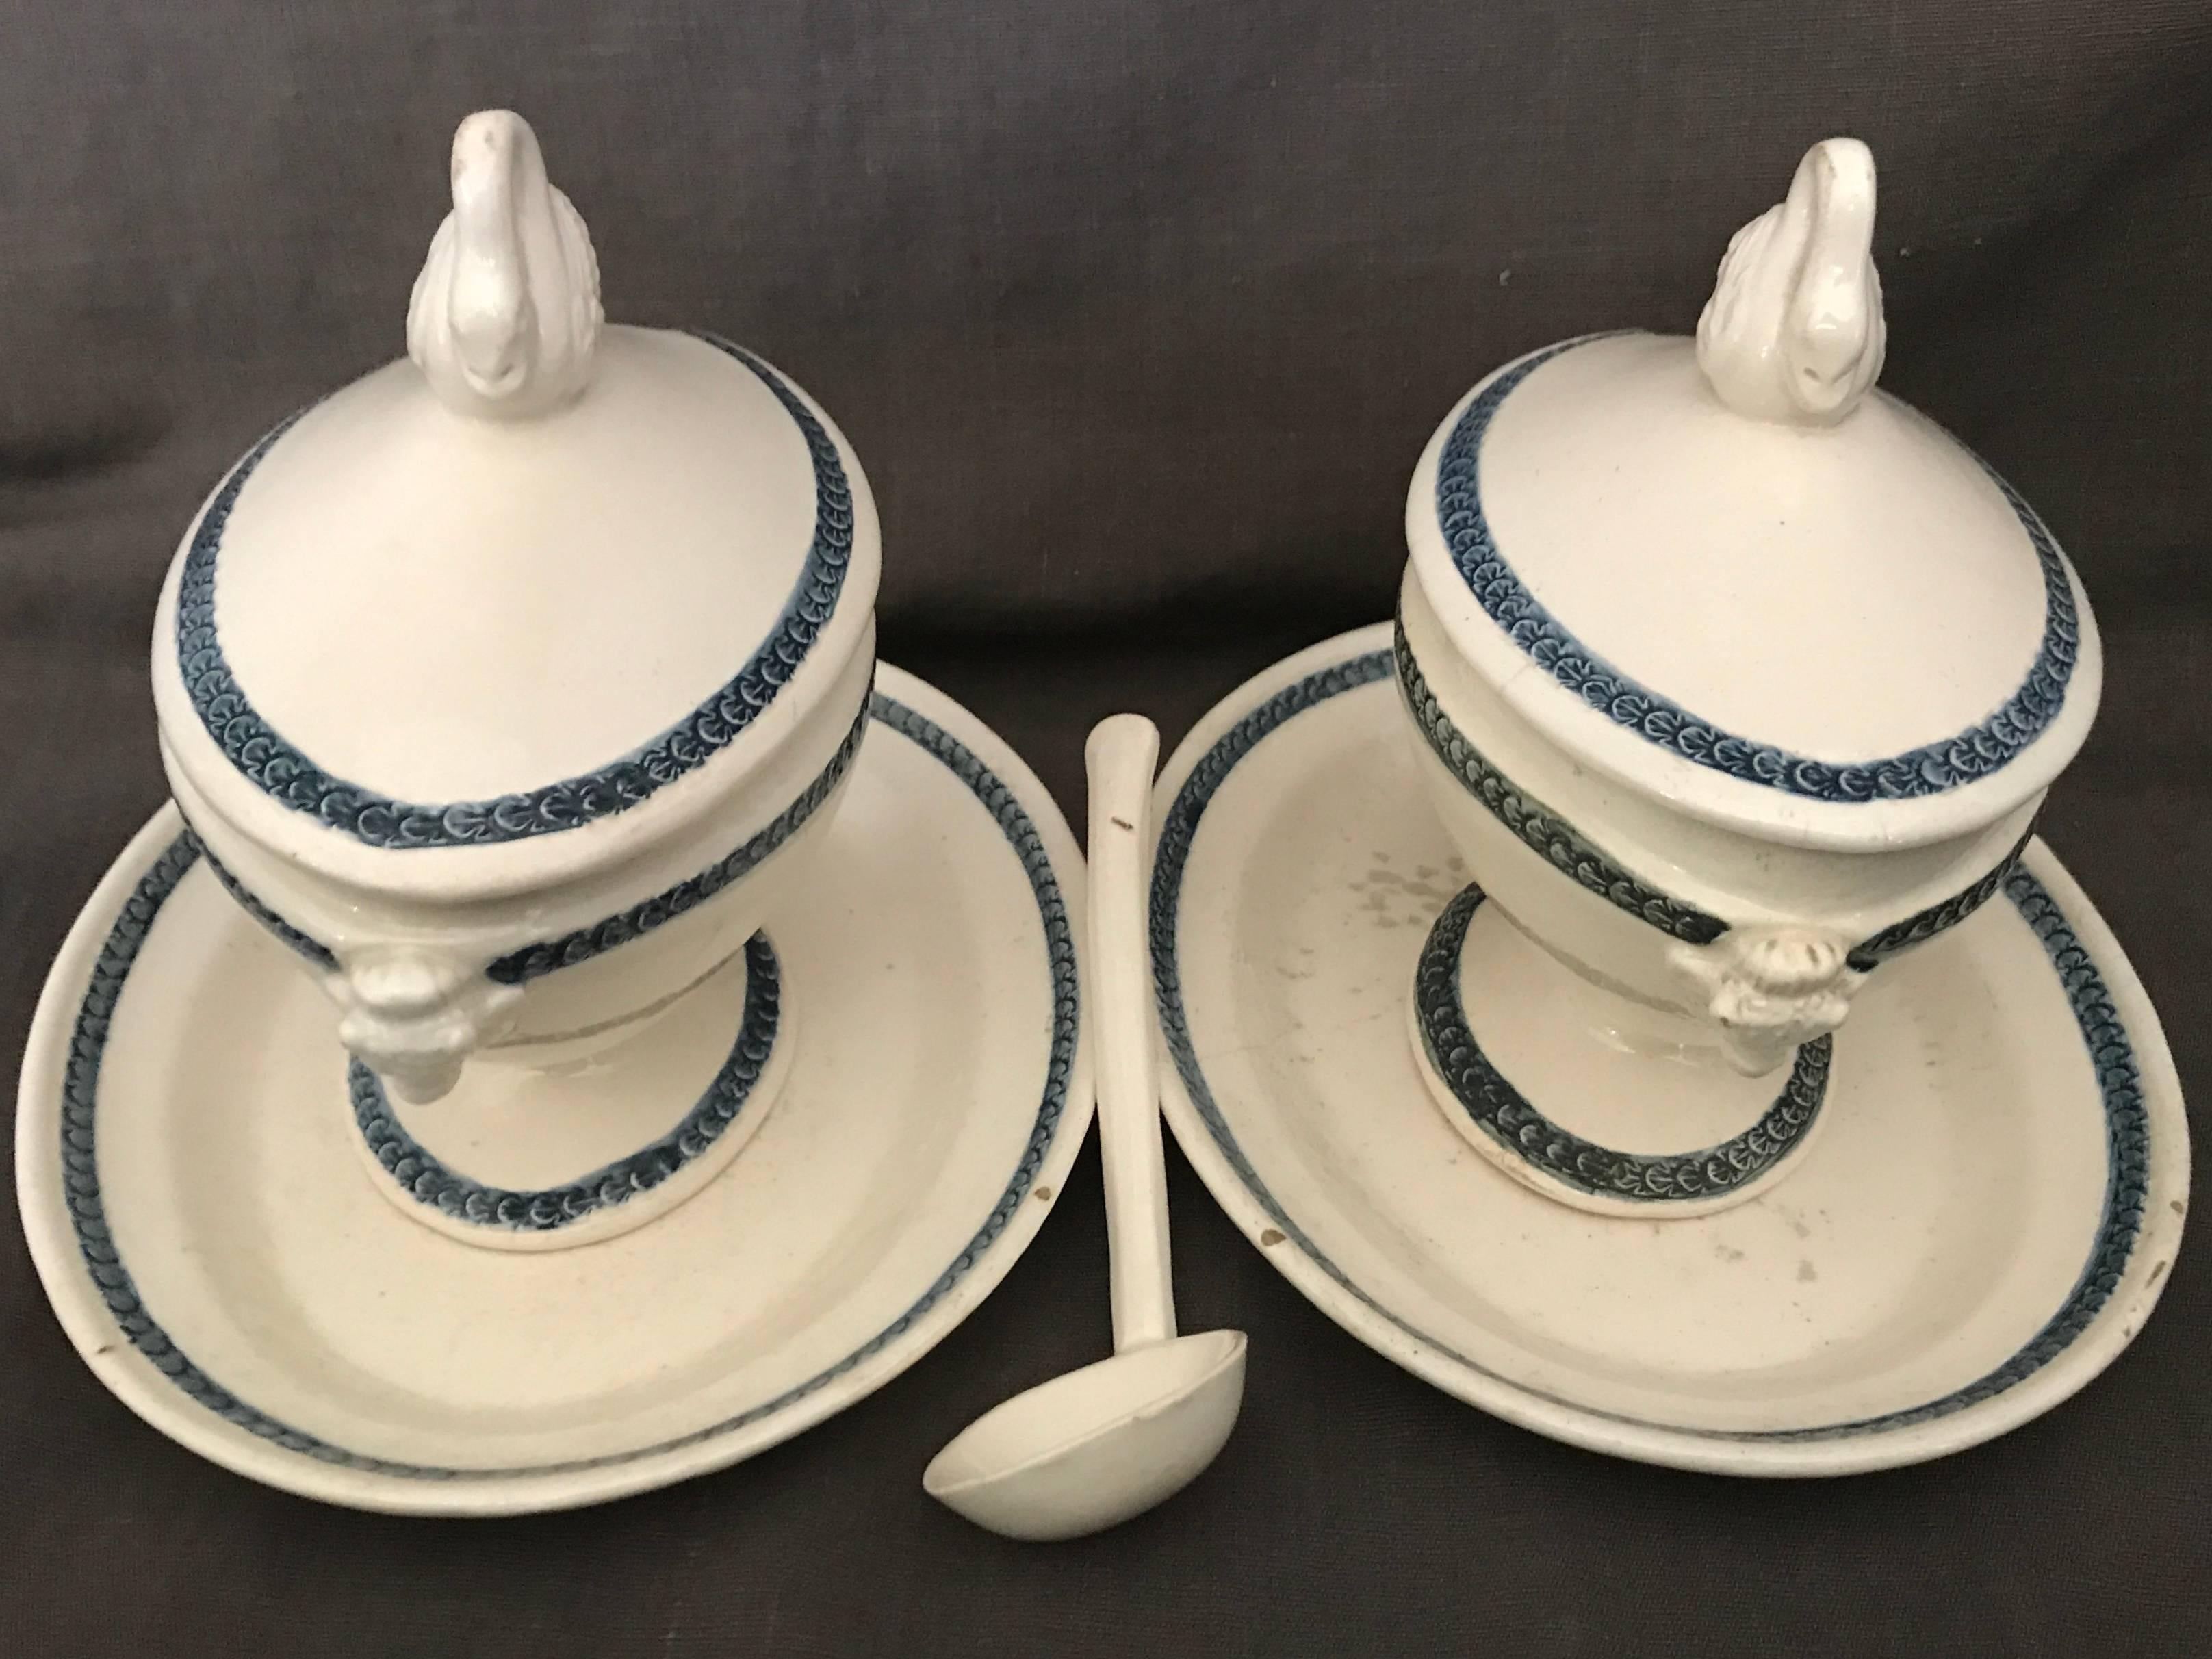 Pair blue and white swan sauce boats. . Neoclassical cream-ware lidded sauce boats with under-plates and original ladle, all with blue and white borders, bovine head handles and swan handled lids. Early Giustiniani manufacture. Italy, circa